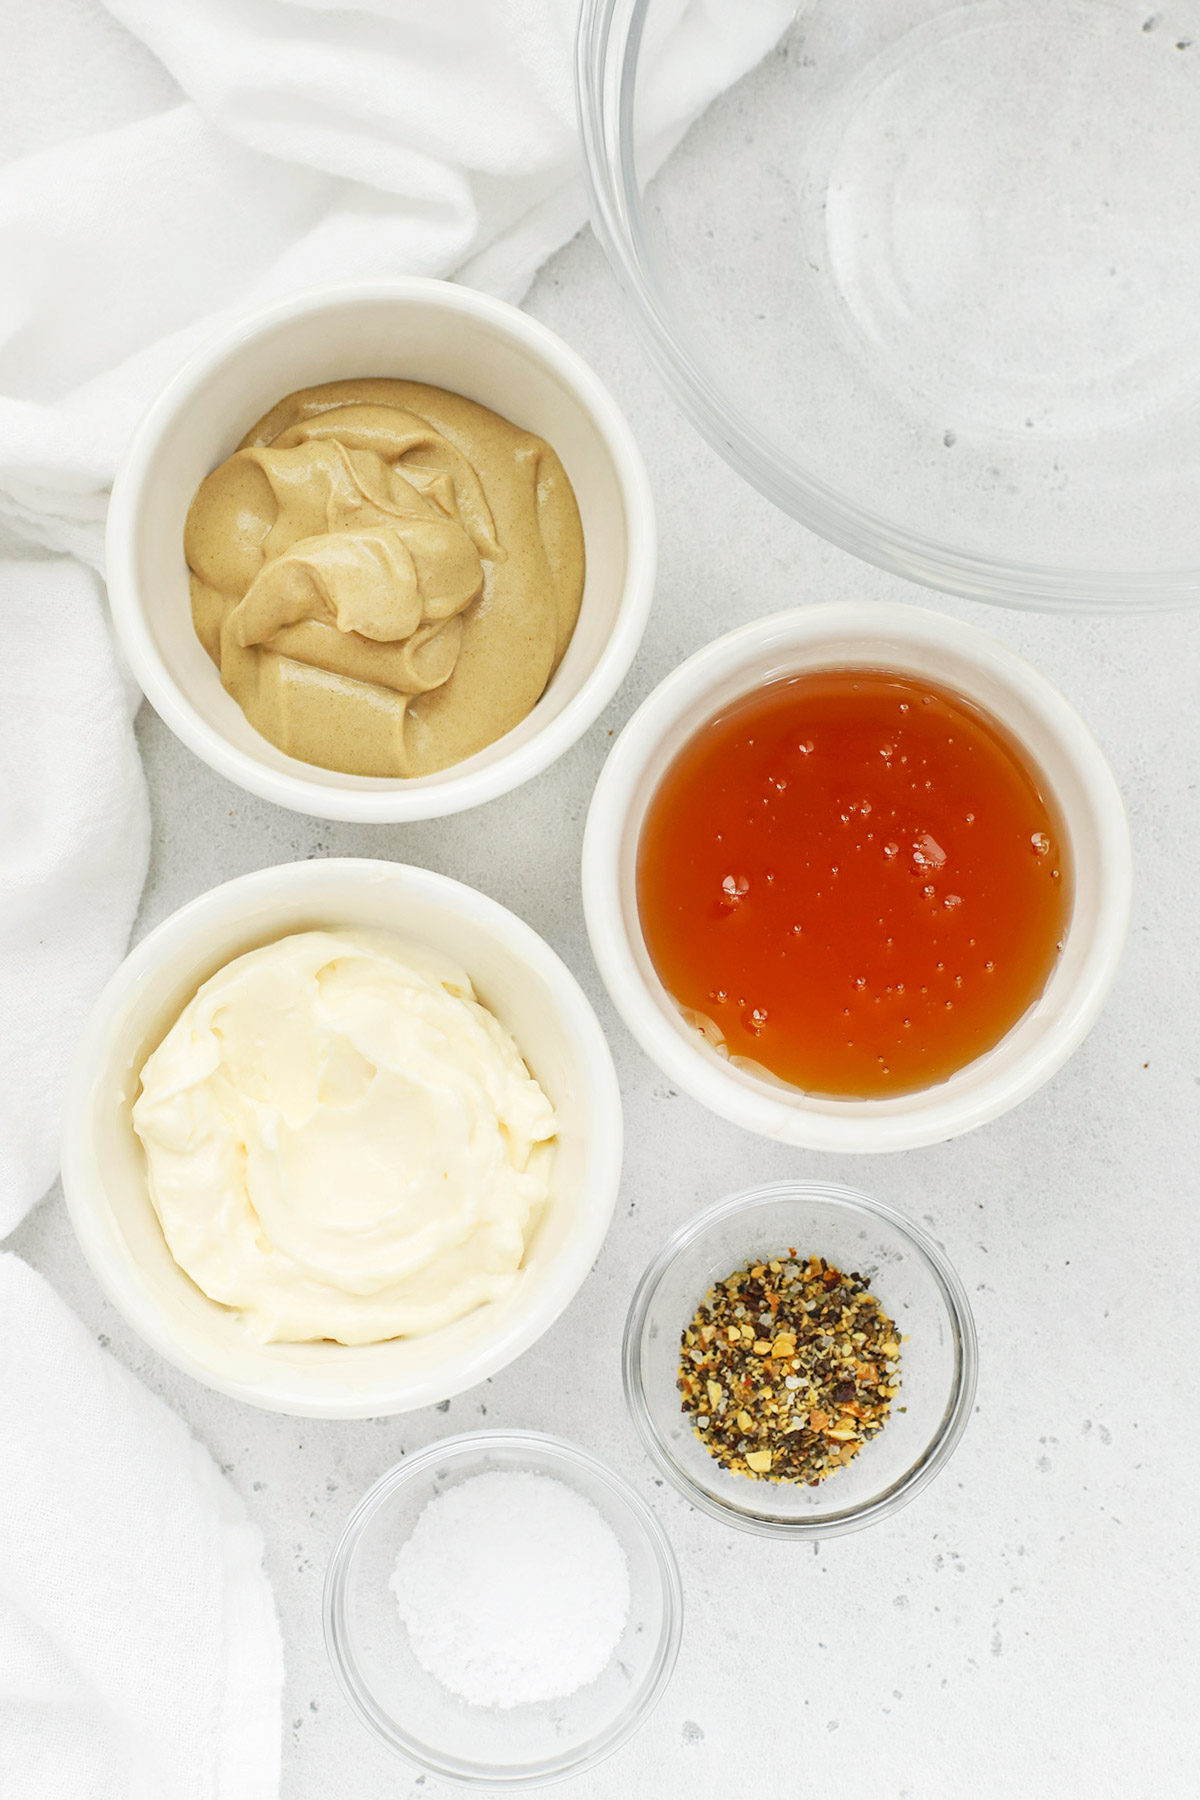 Overhead view of ingredients for honey mustard dressing